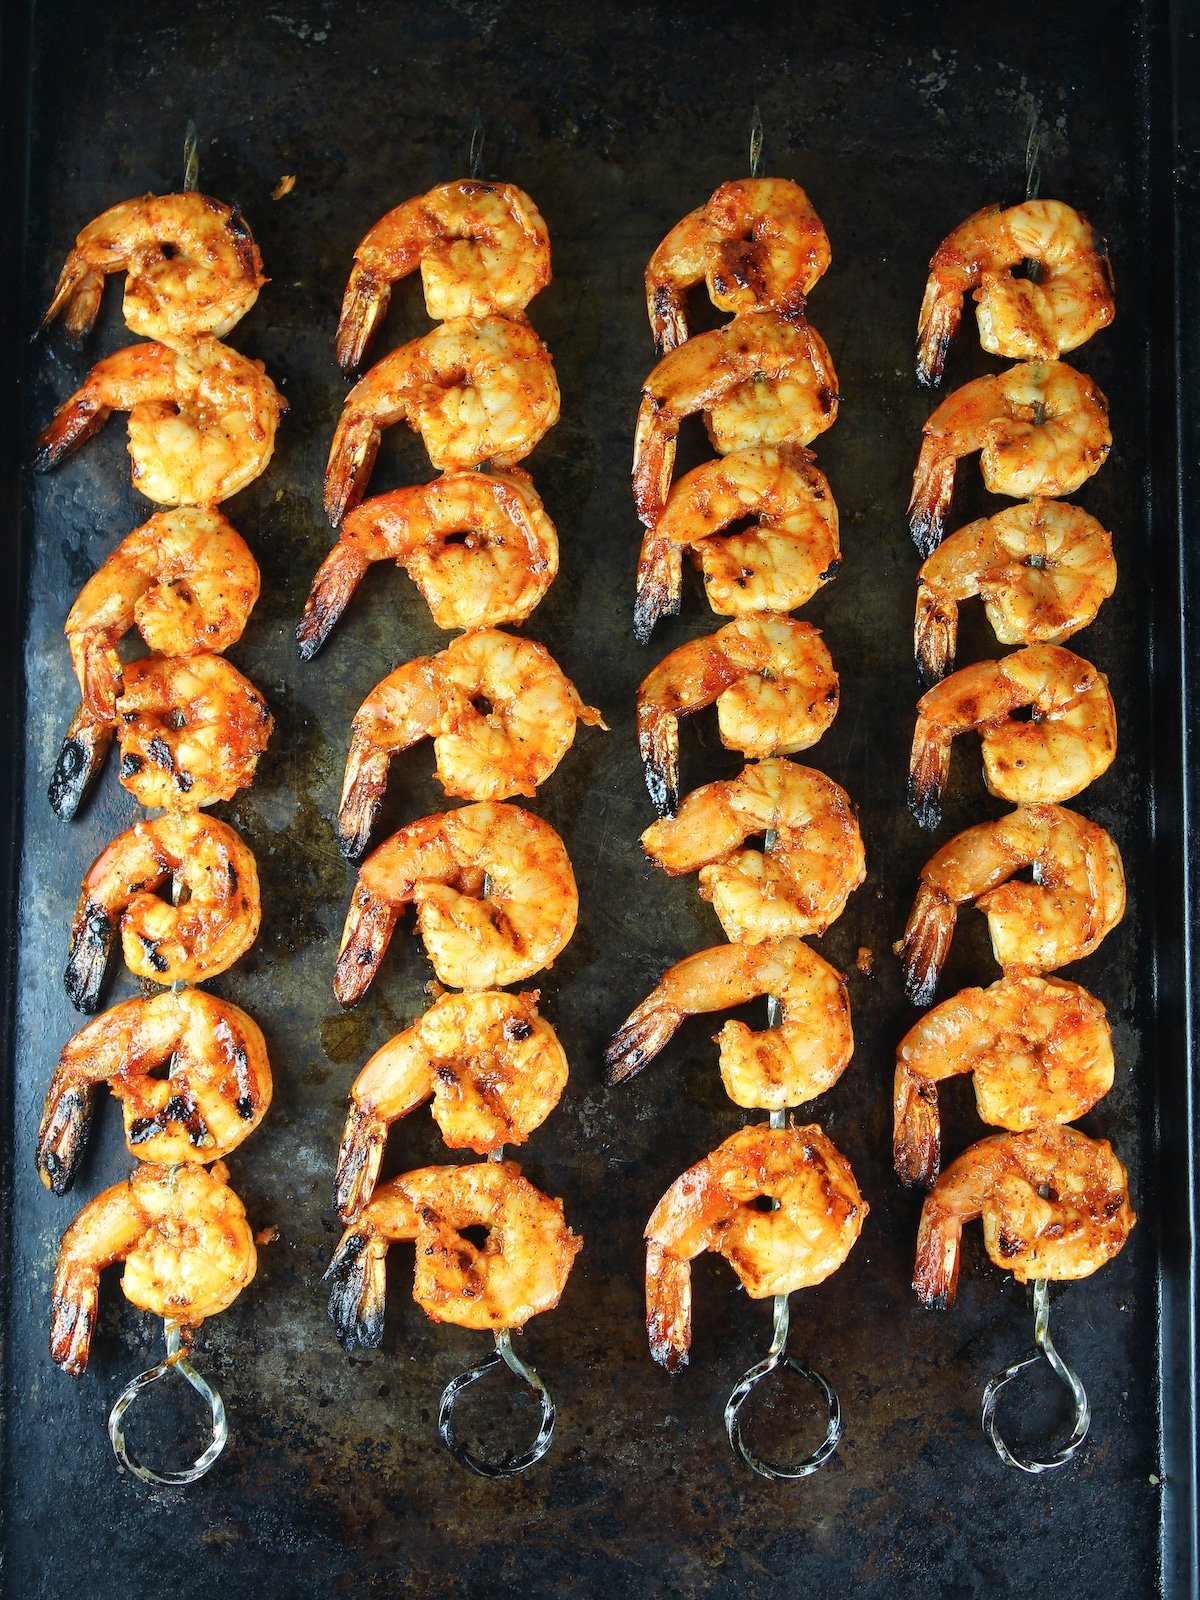 Skewered shrimp on a baking sheet that have been cooked.